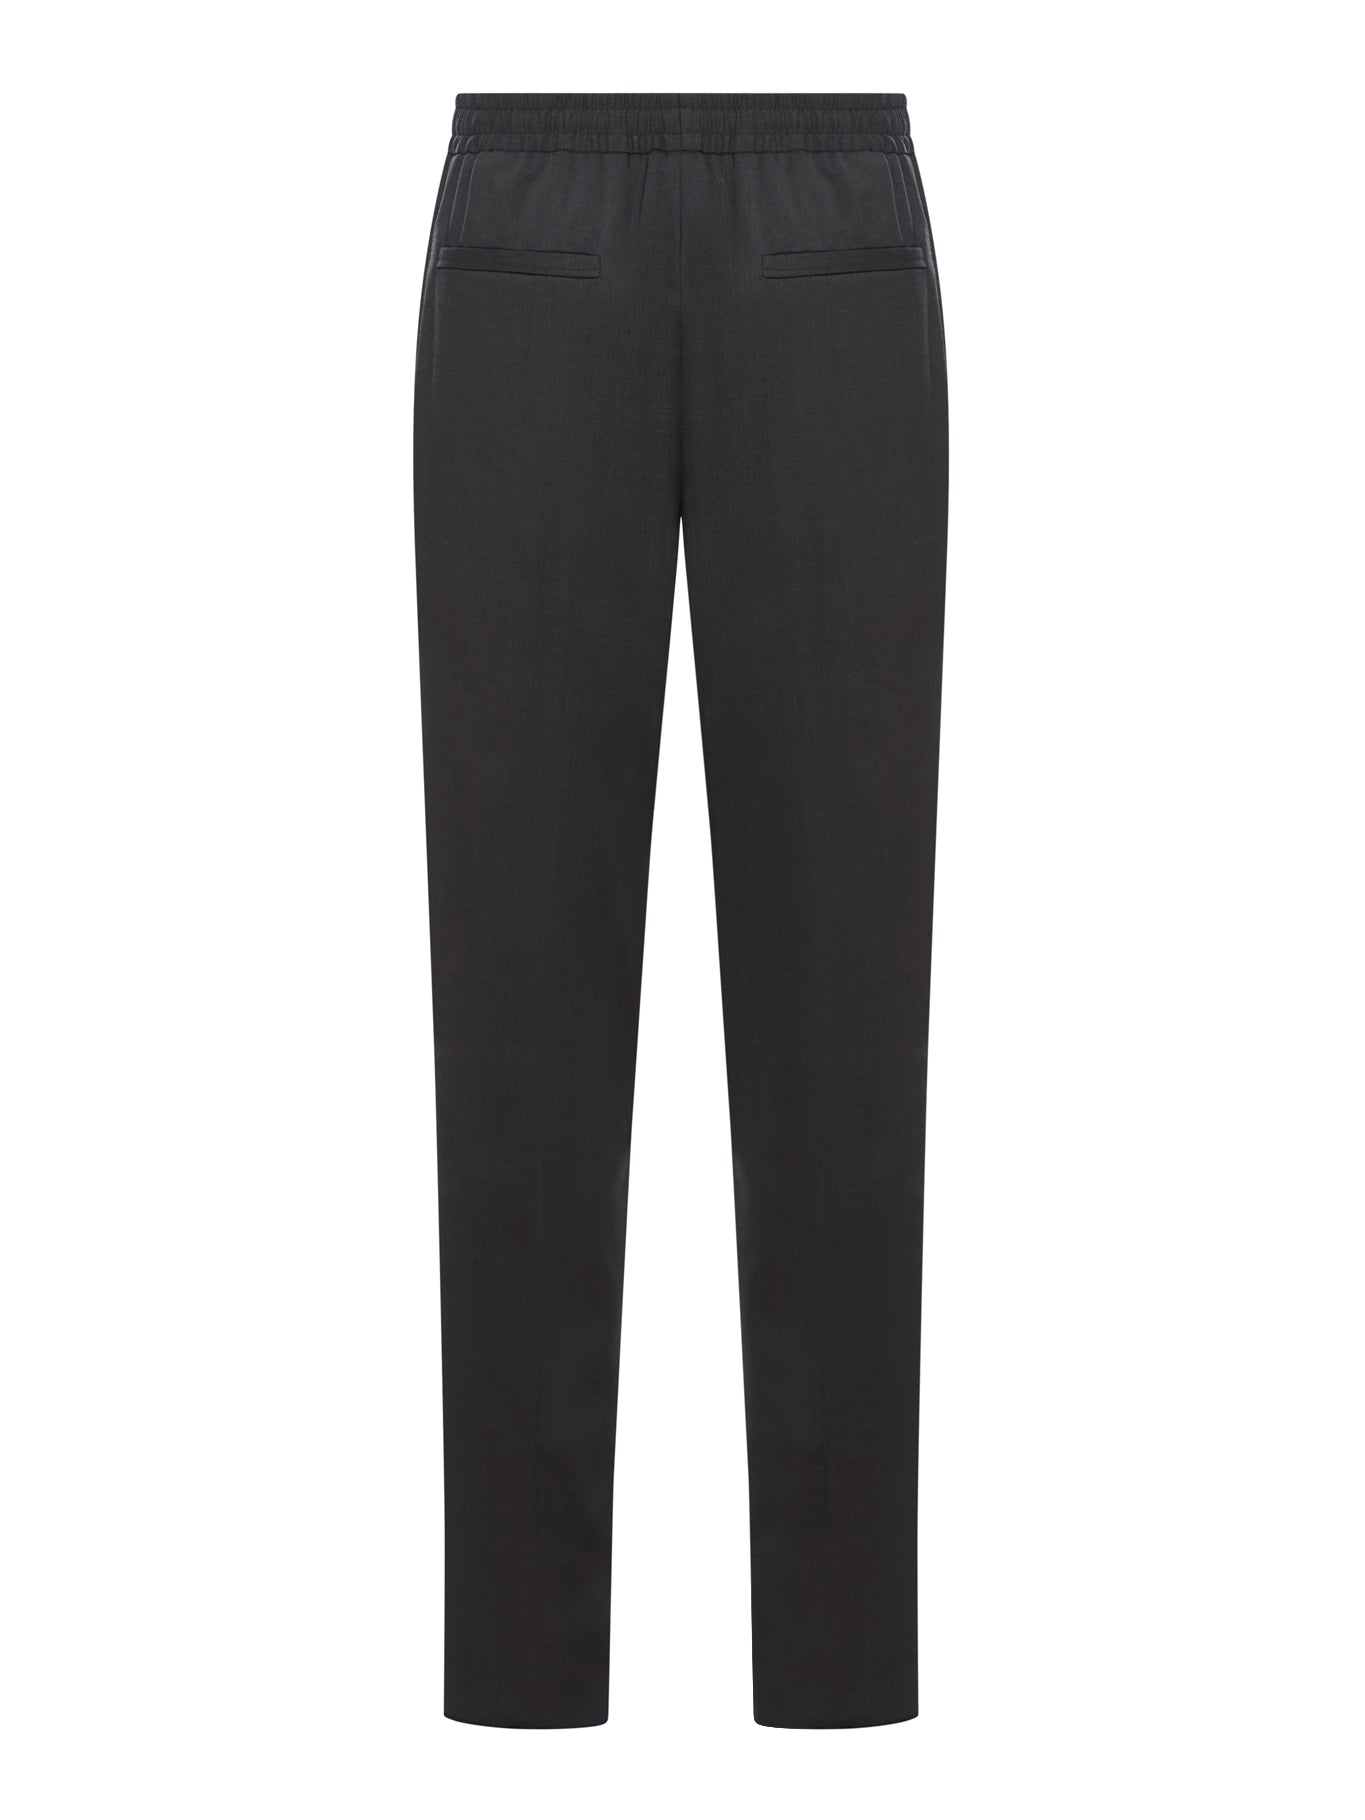 LONG FORMAL TROUSERS